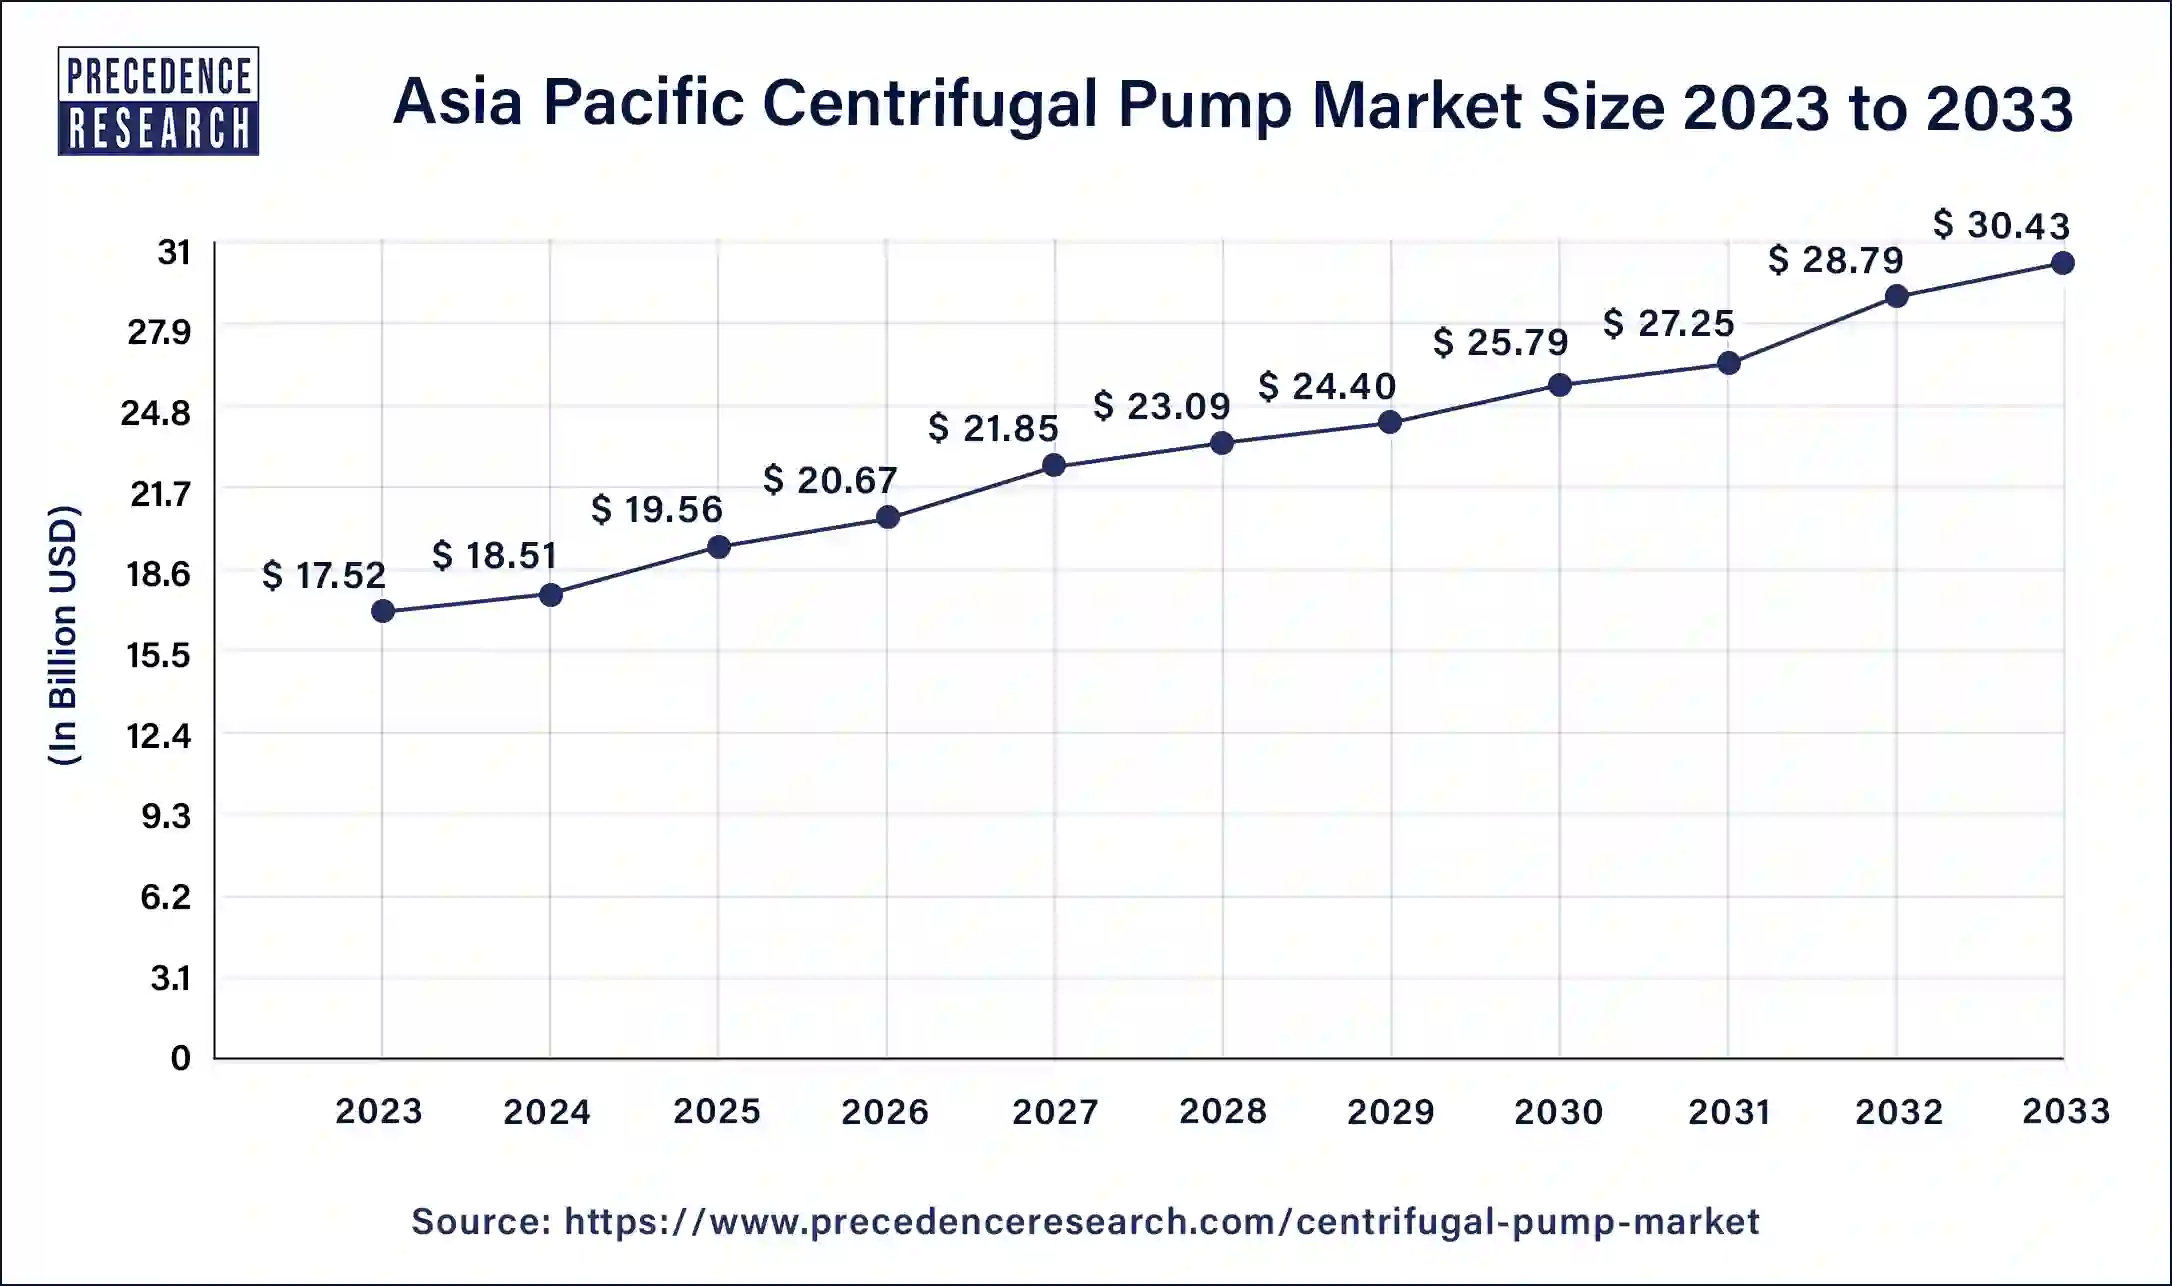 Asia Pacific Centrifugal Pump Market Size 2024 to 2033